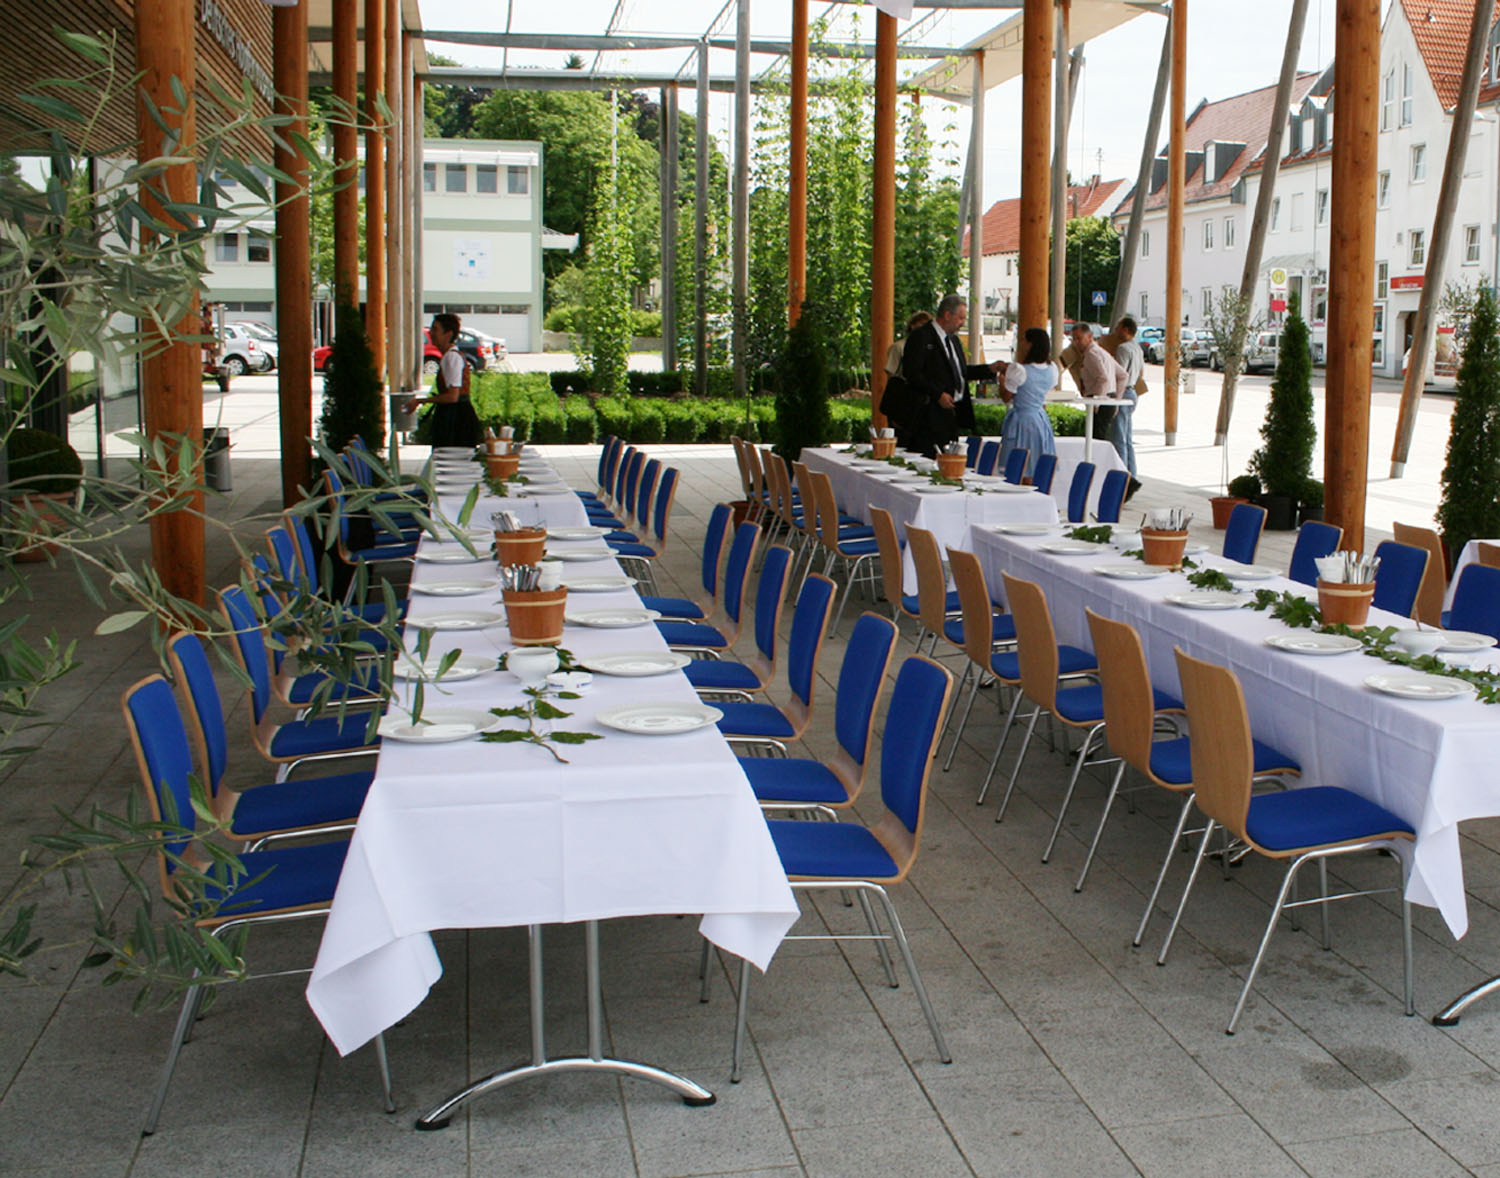 Banquet seating on the museum forecourt